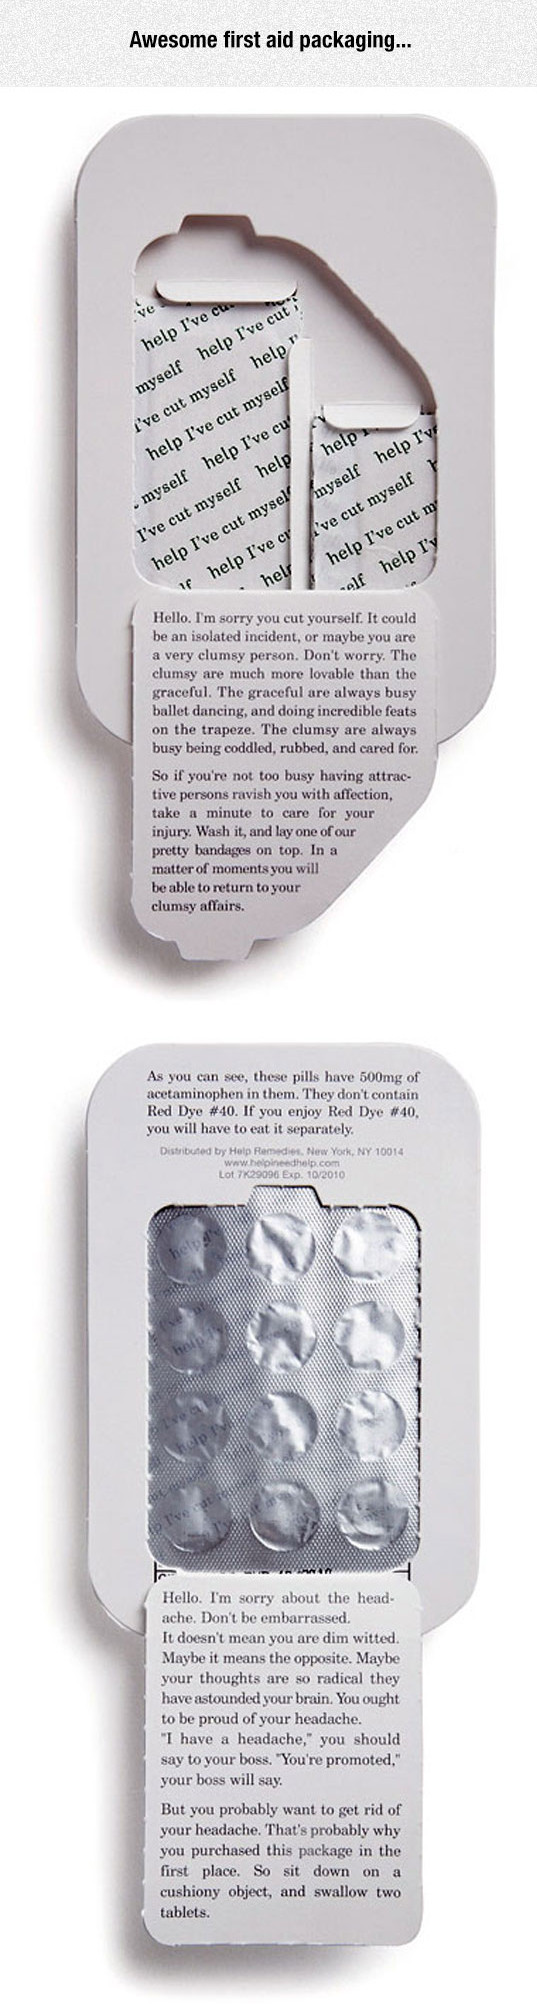 cool-first-aid-packaging-design